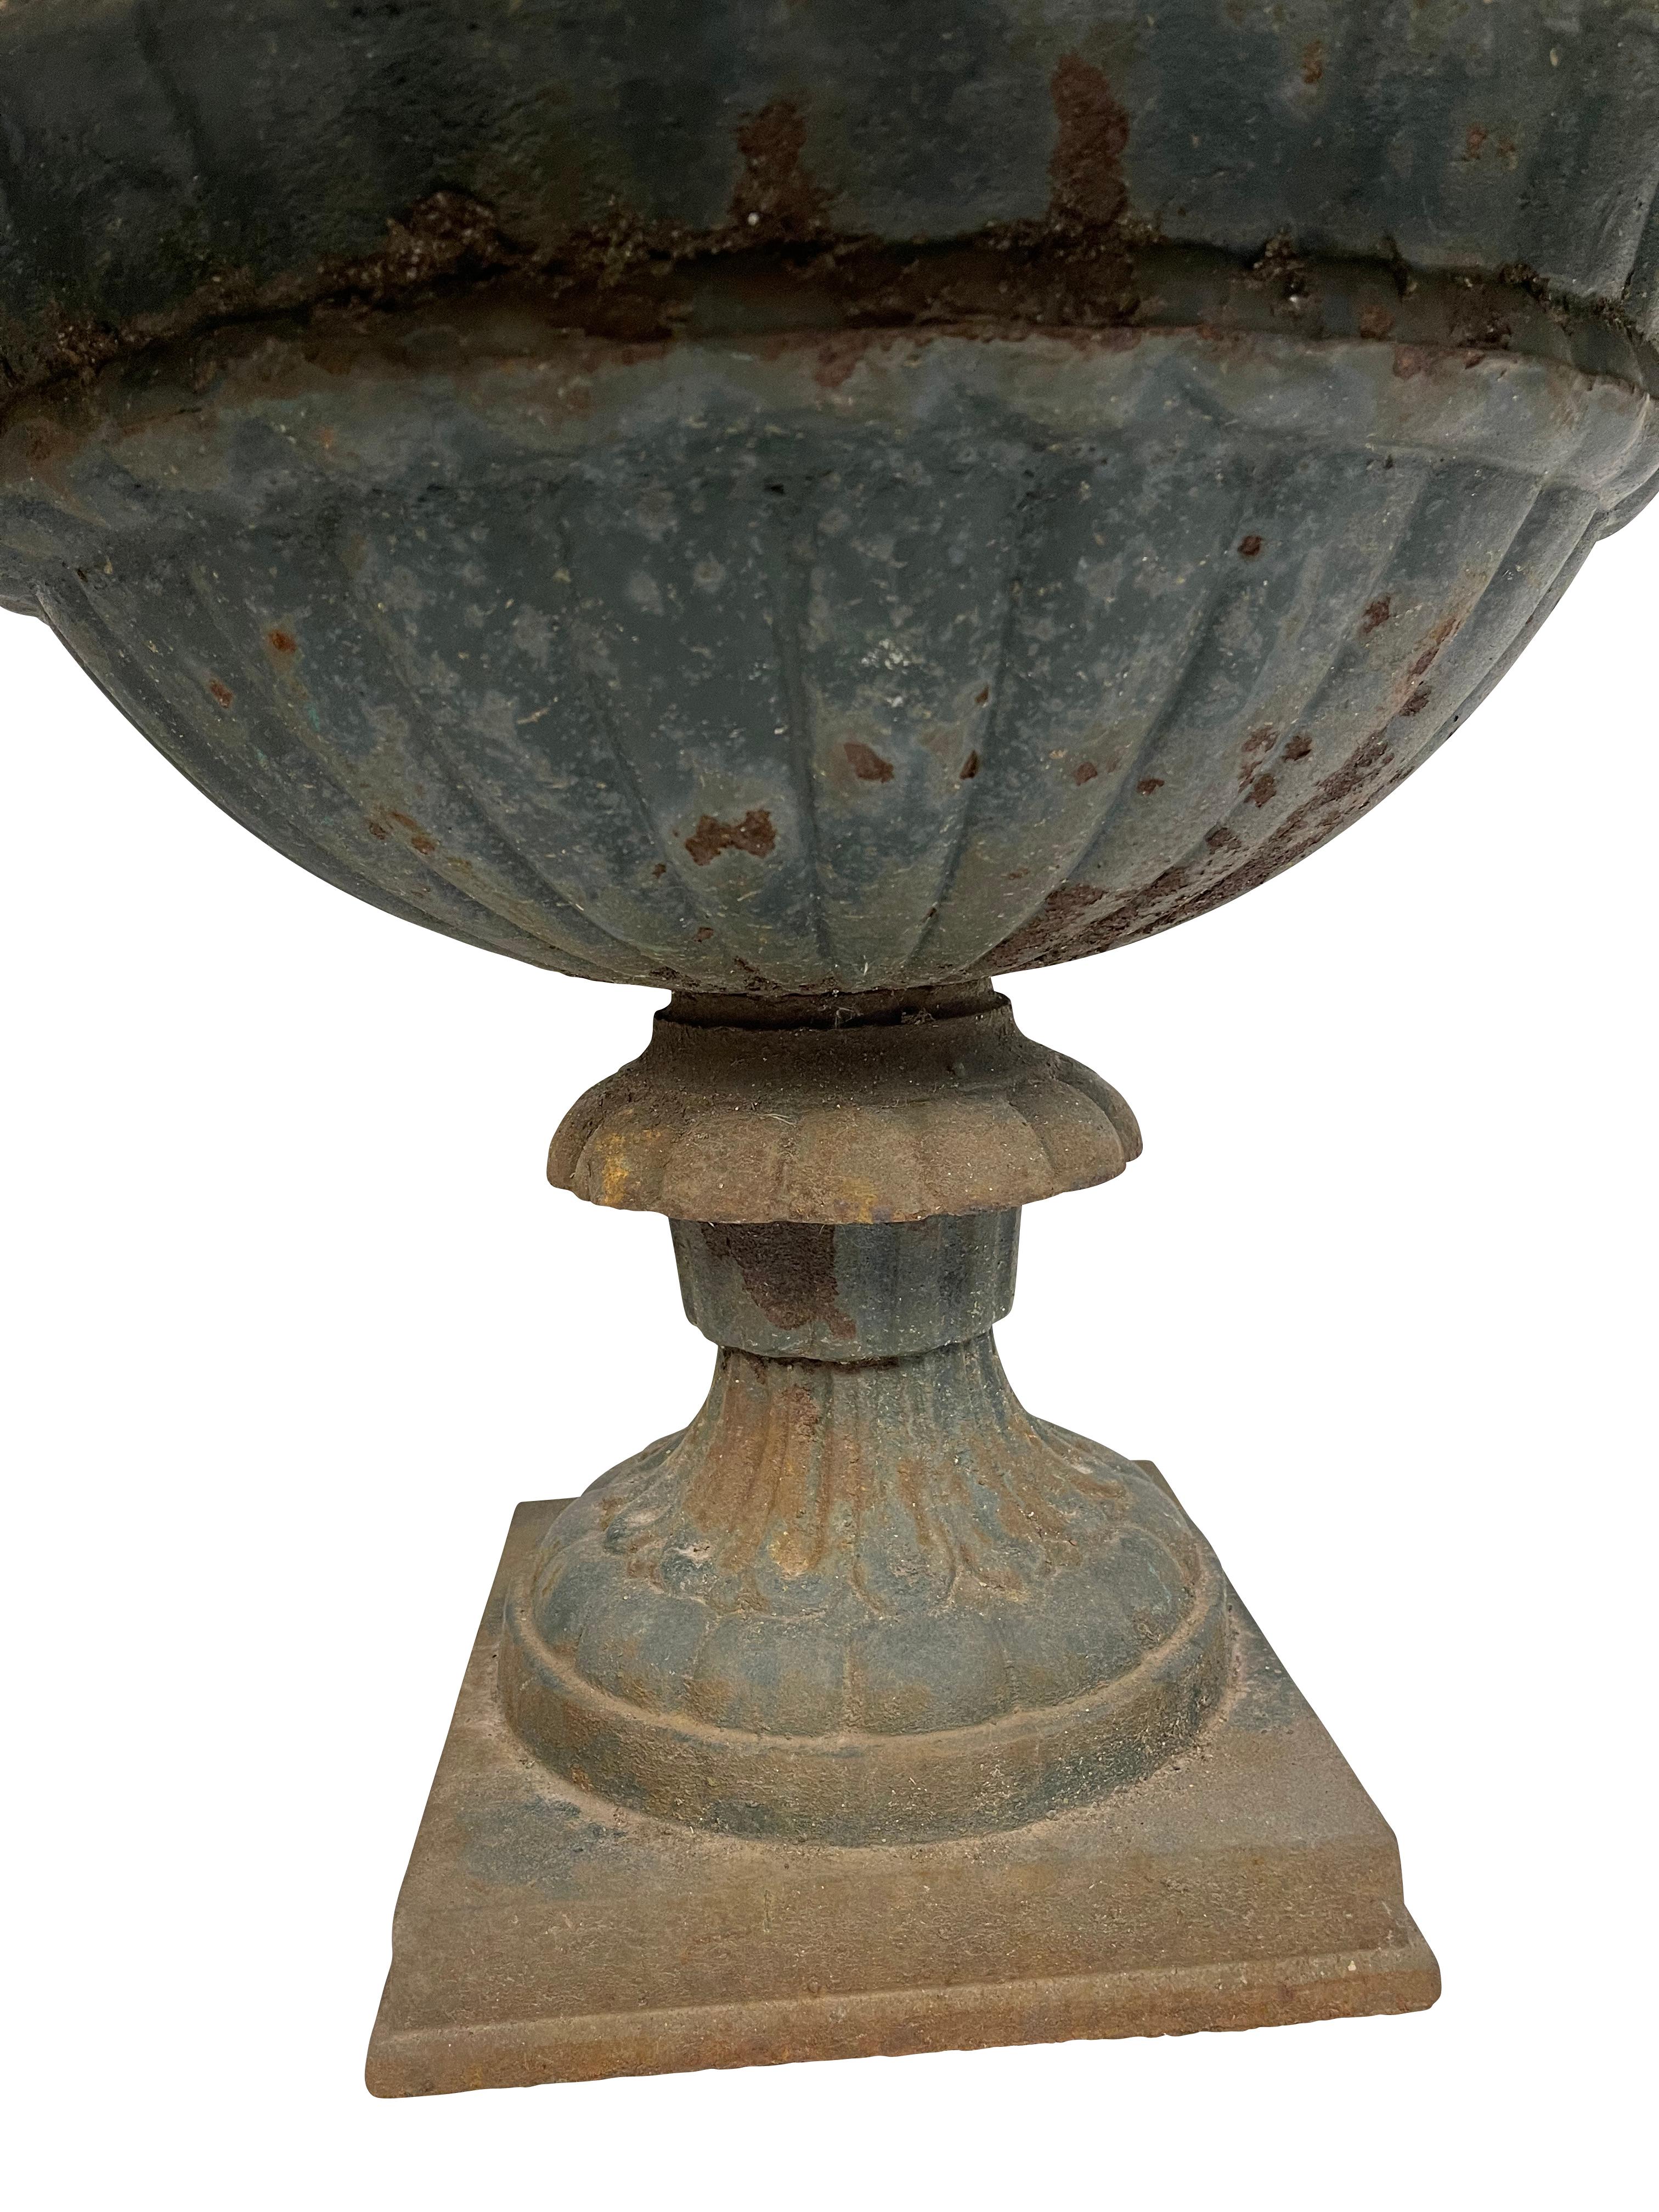 Pair of Victorian cast iron urns with decorative flared border rims. These rims have are accented with unique stylish motifs. Each urn planter is mounted on a sturdy square shape platform.